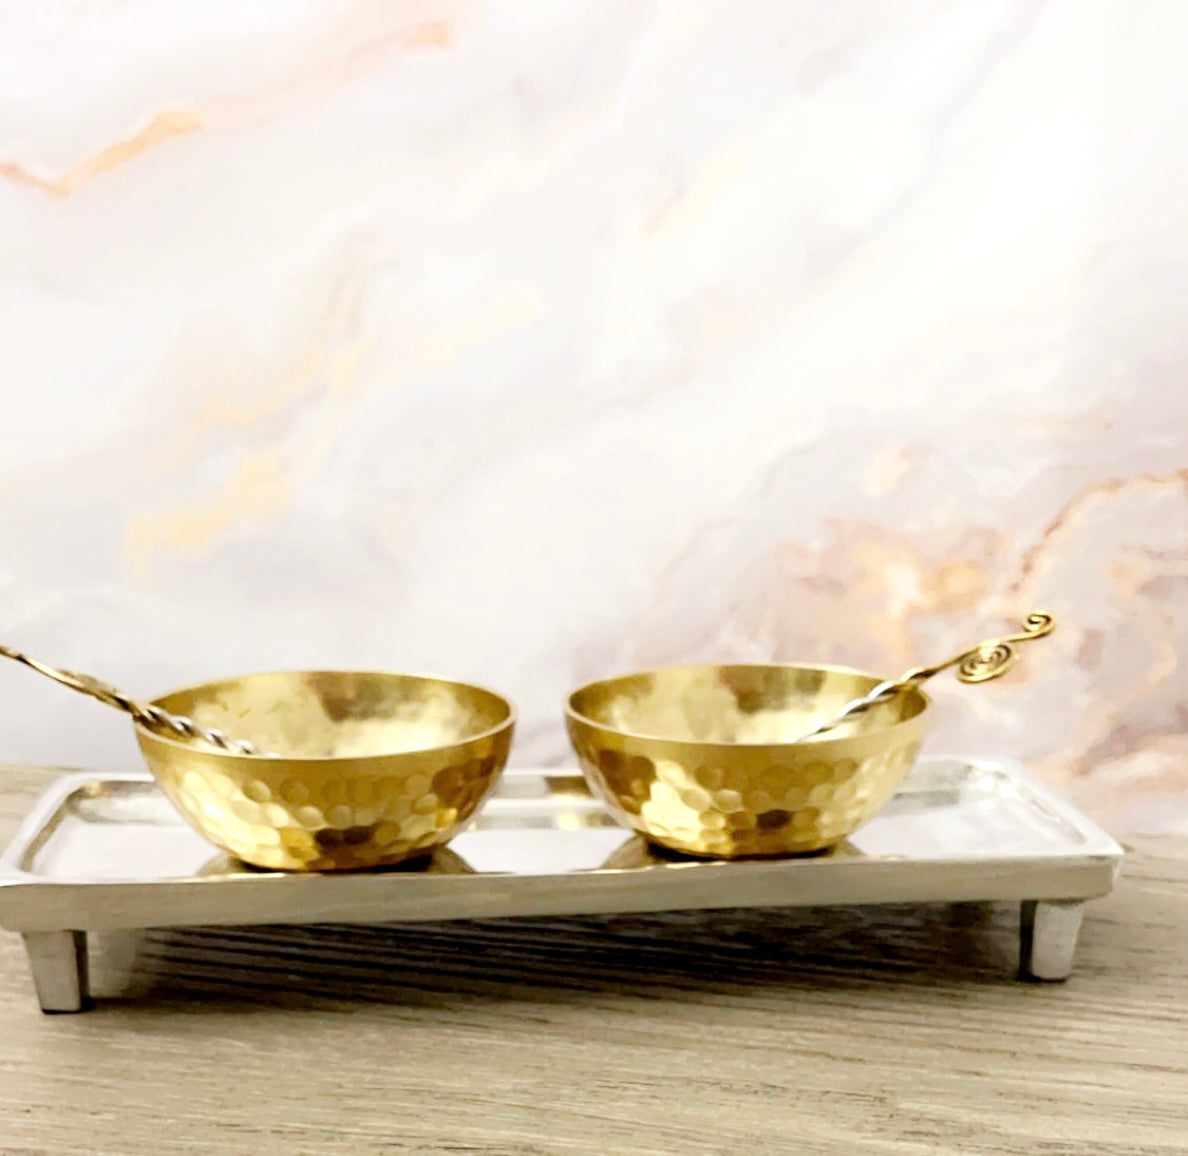 SILVER TRAY WITH GOLD BOWLS W/ SPOONS